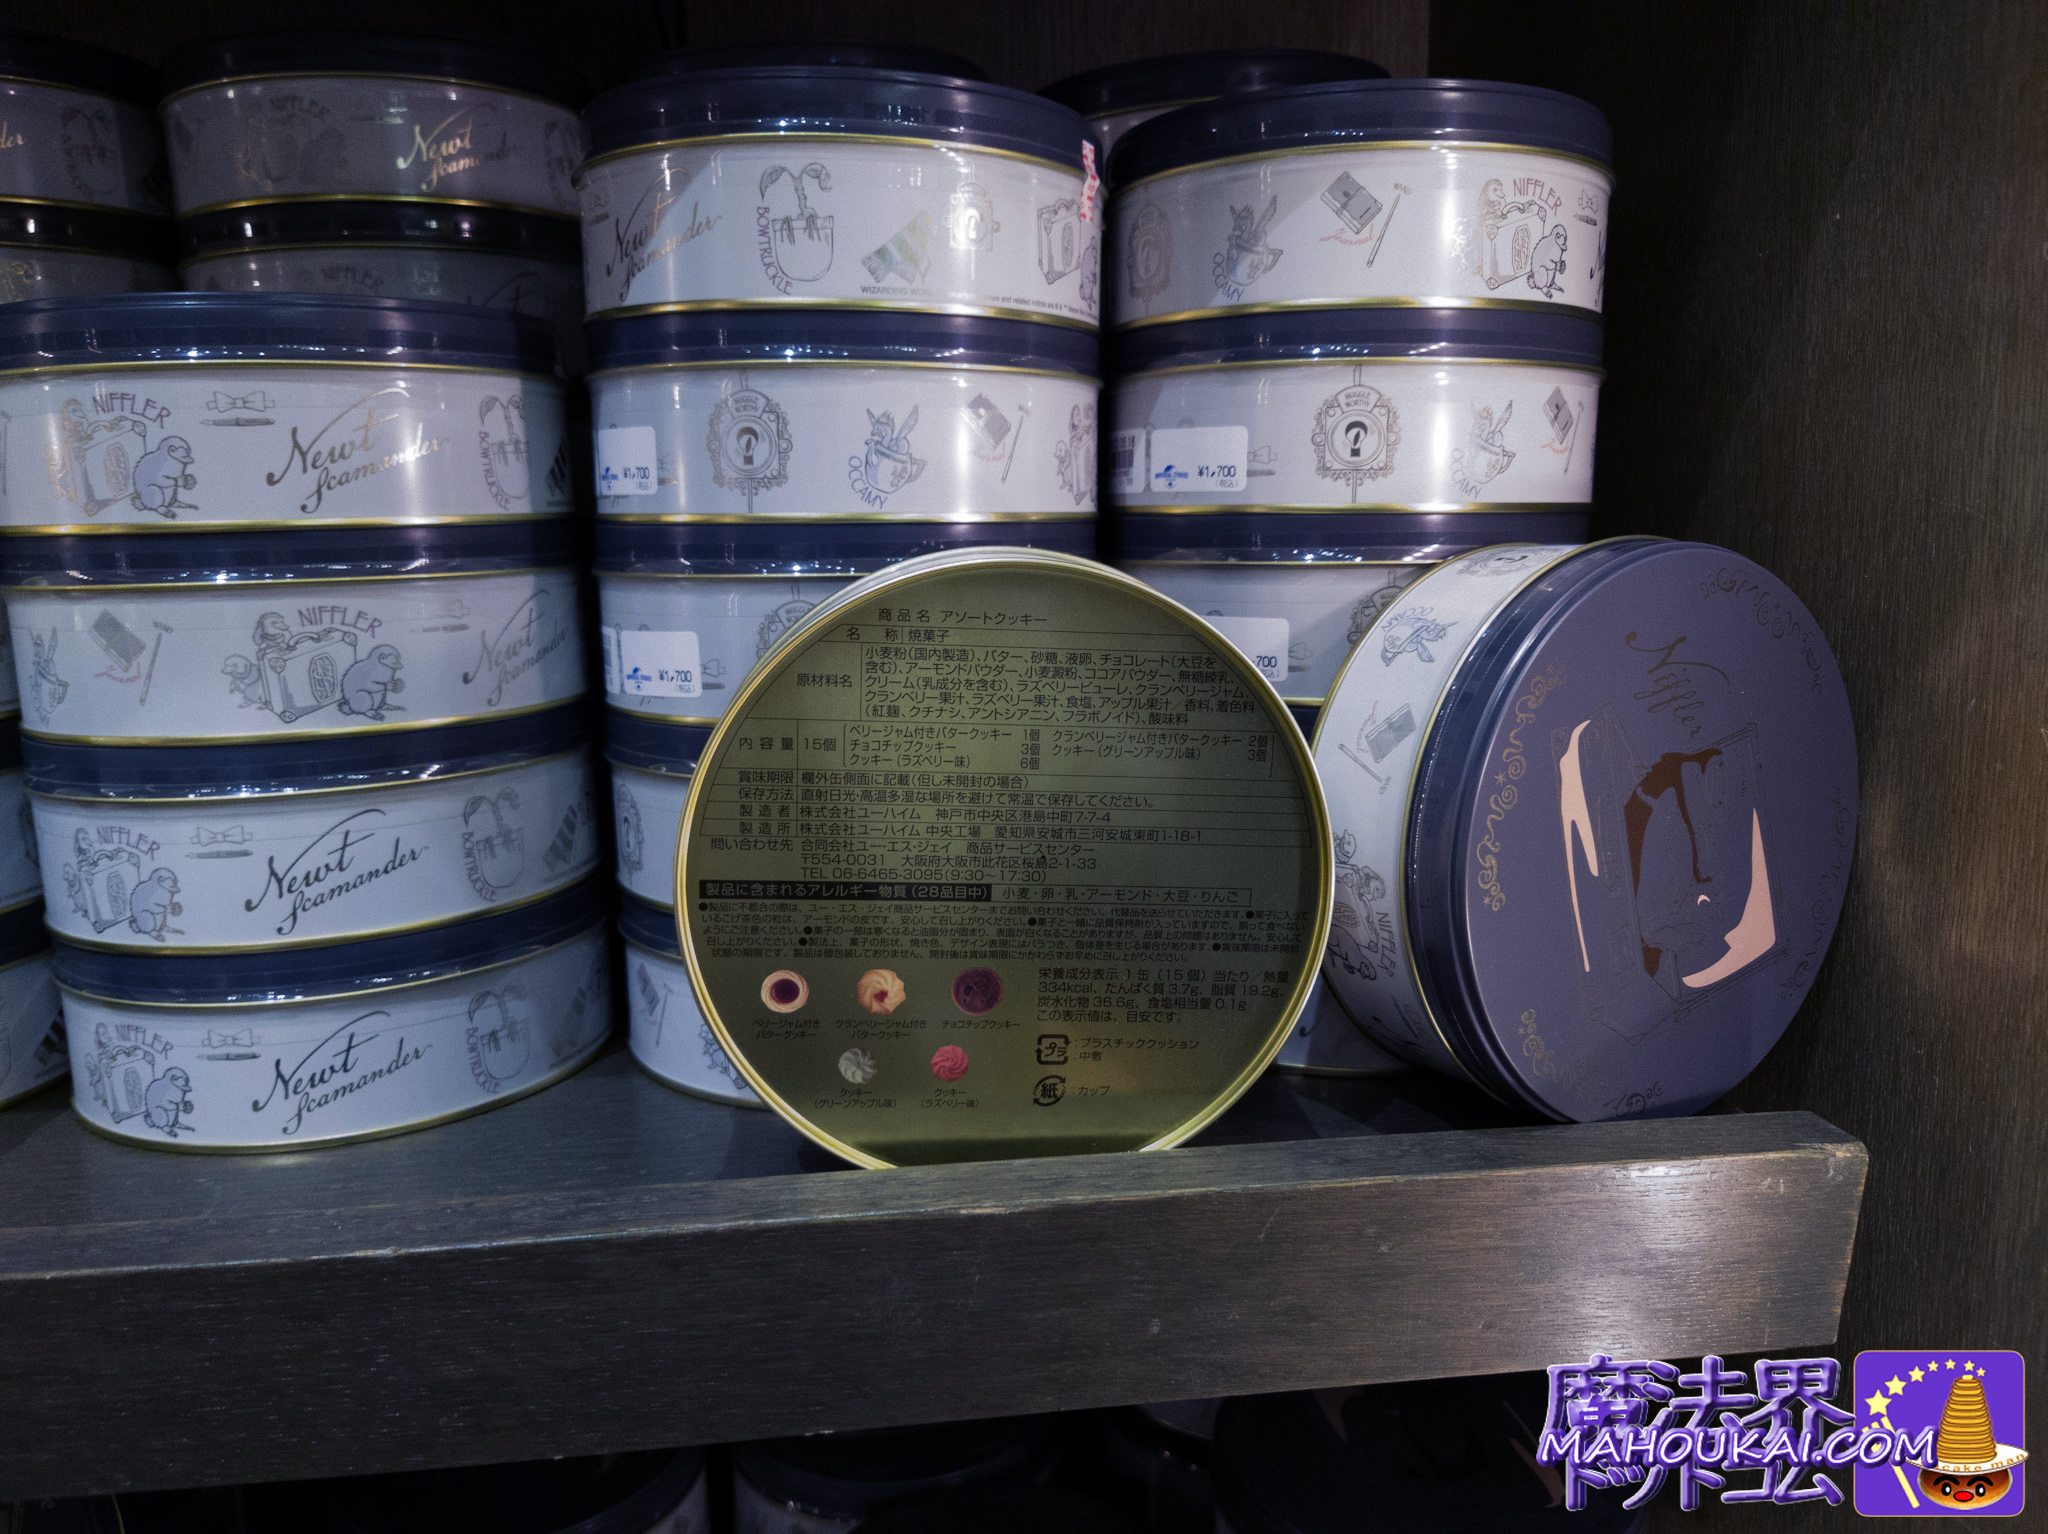 Sweets Overview [USJ Souvenir Sweets] Fantabi-Niffler Round Tin Biscuits 5 kinds set ｜ Harry Potter Area "Filch's Confiscated Goods Store" Outside Area Shop